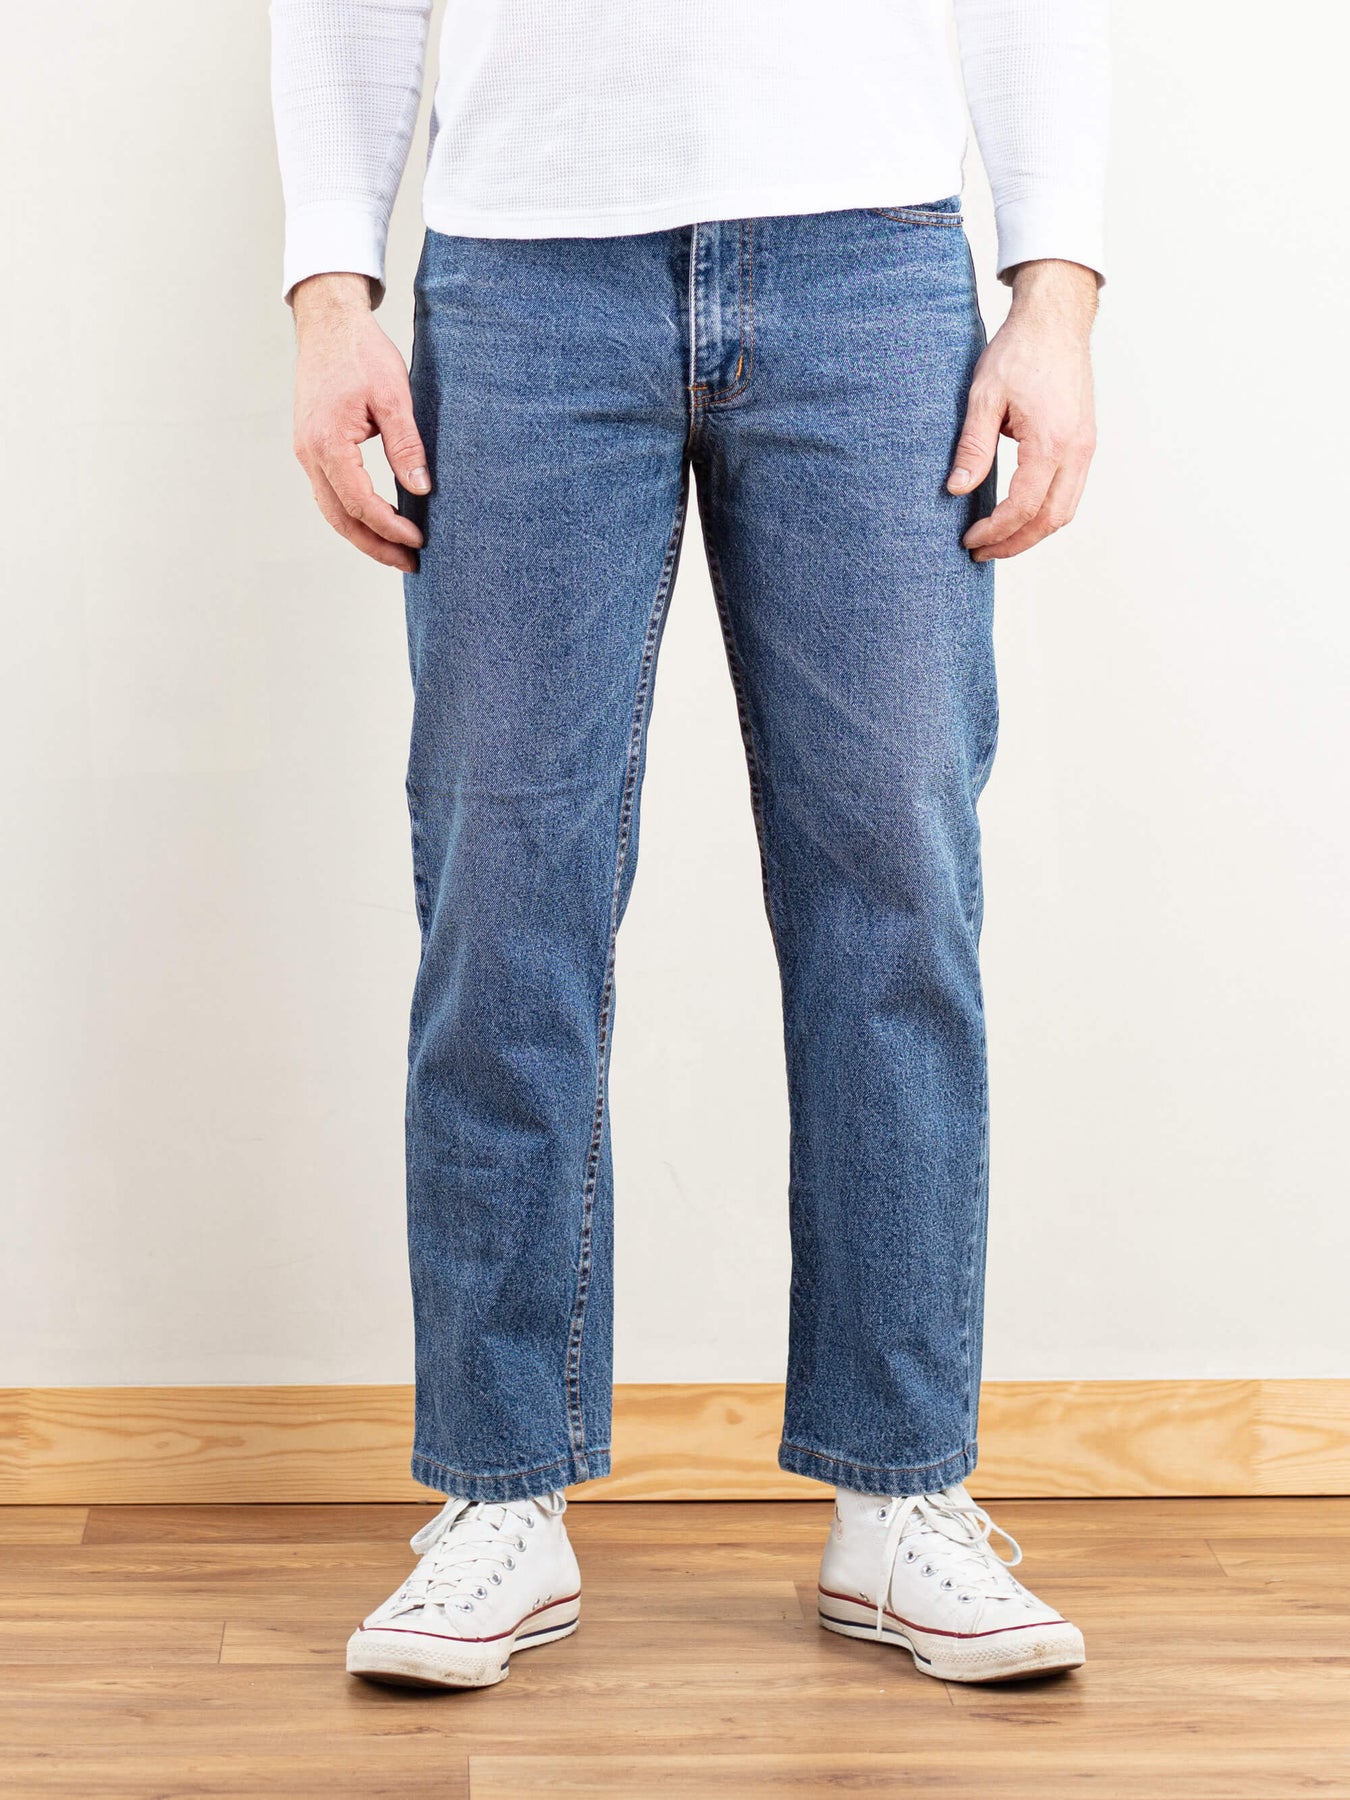 3 Denim Jeans Every Man Should Have in Their Wardrobe - Styled By Sally